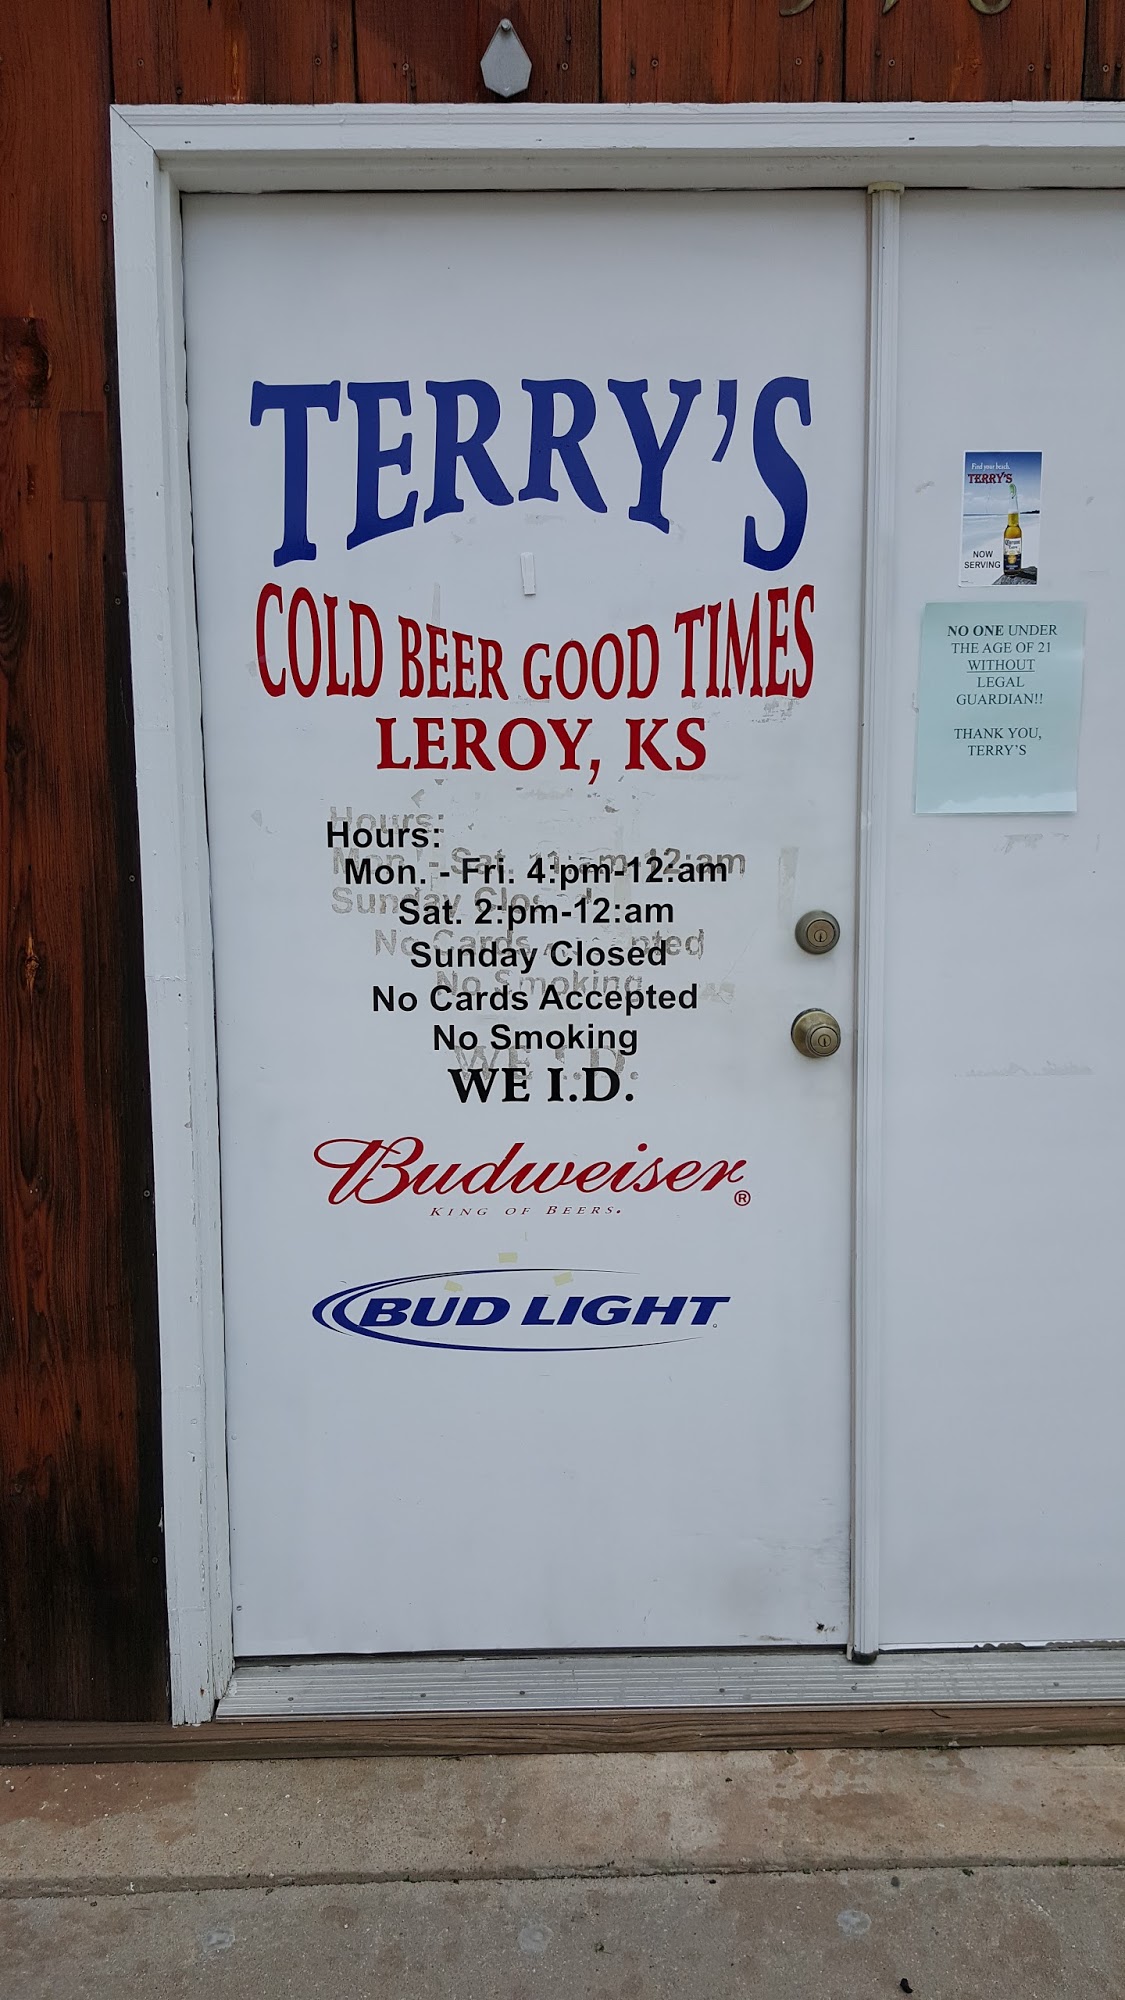 Terry's - COLD BEER GOOD TIMES